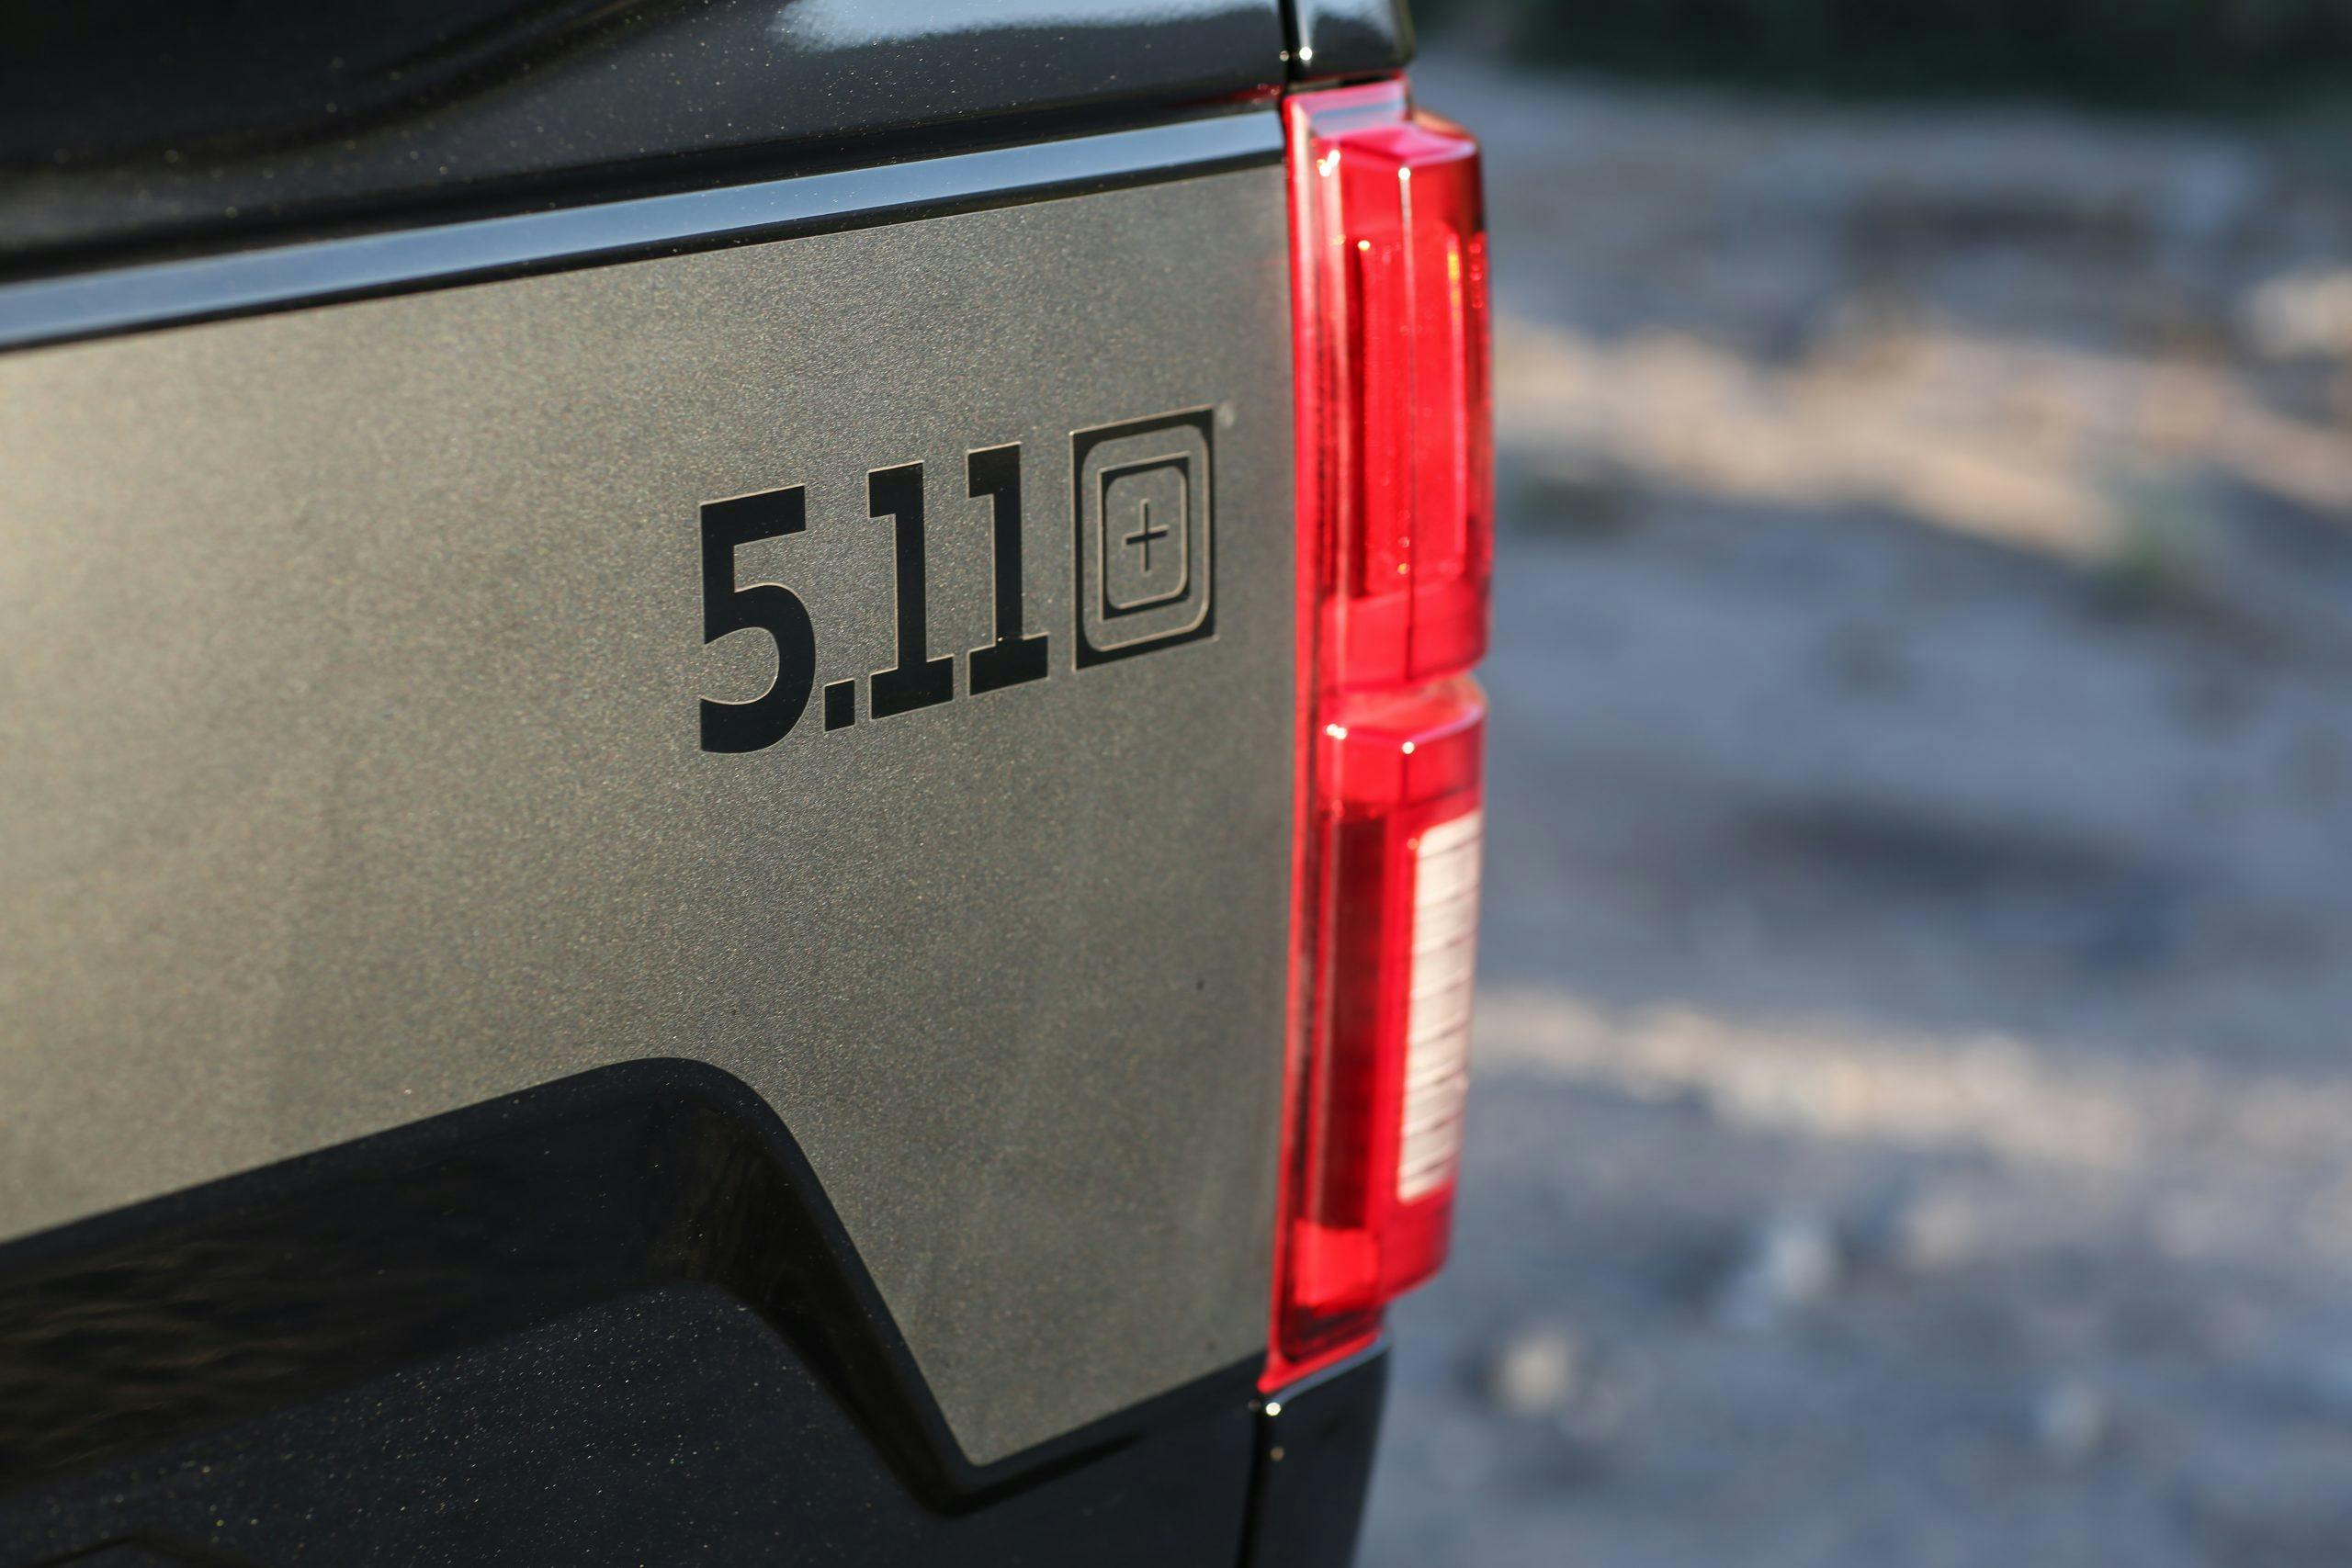 2020 F-150 Roush 5.11 Tactical Edition rear light and stickers